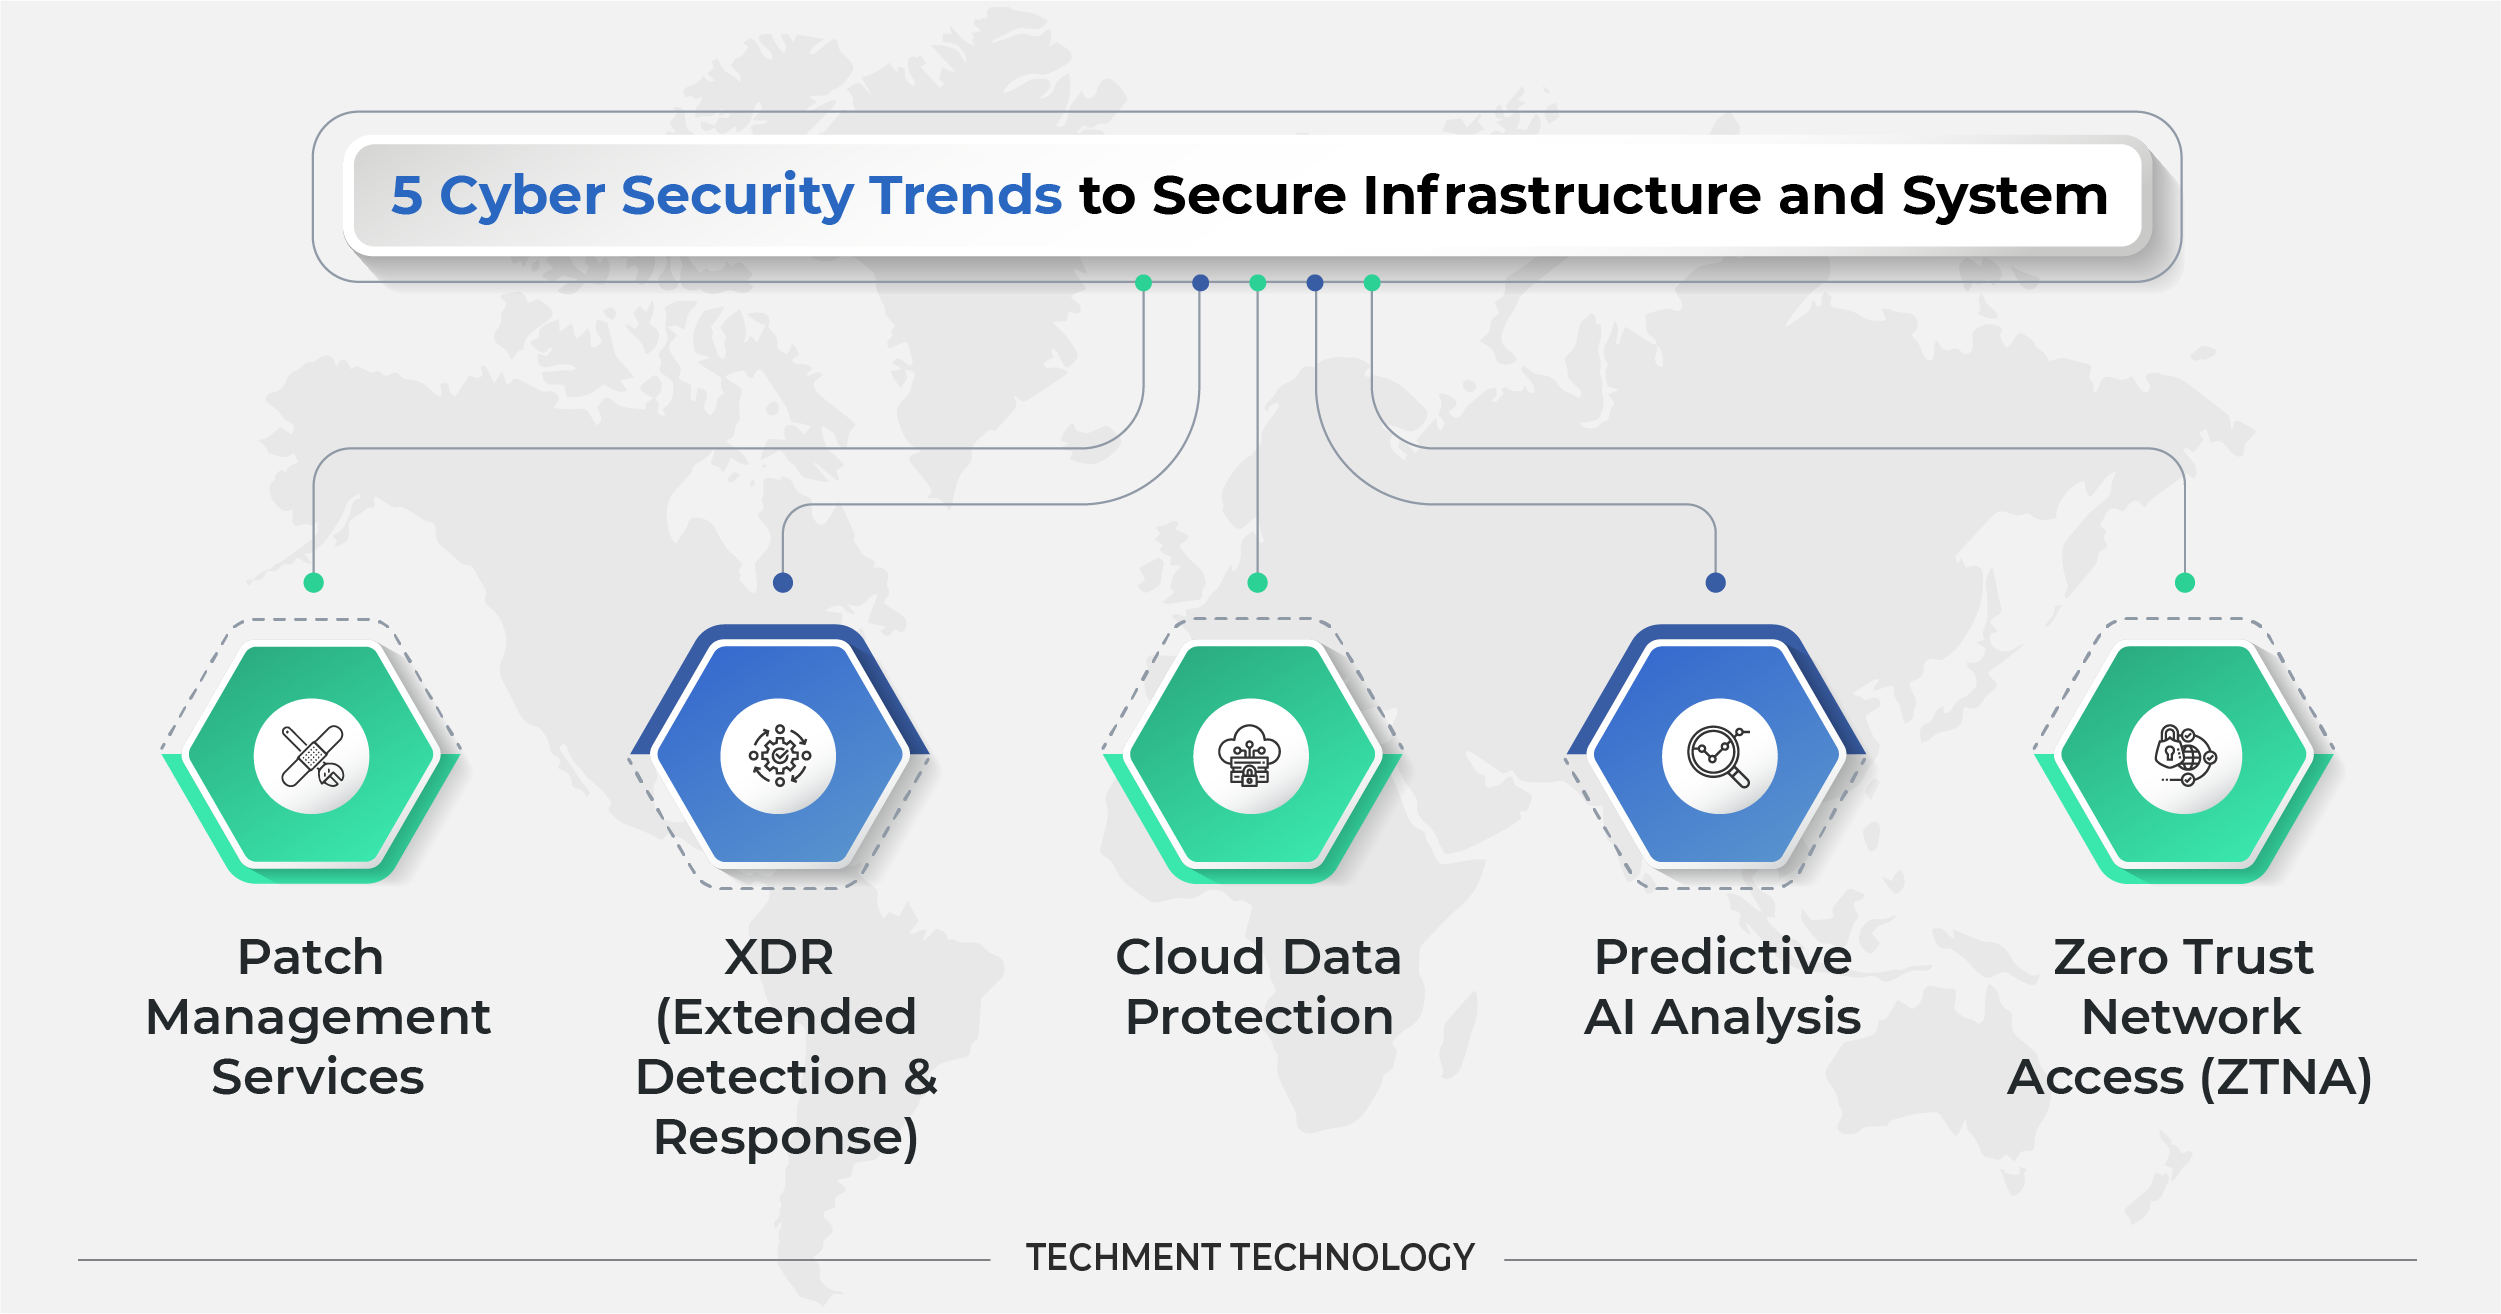 5 Cyber Security Trends to Secure Infrastructure and System